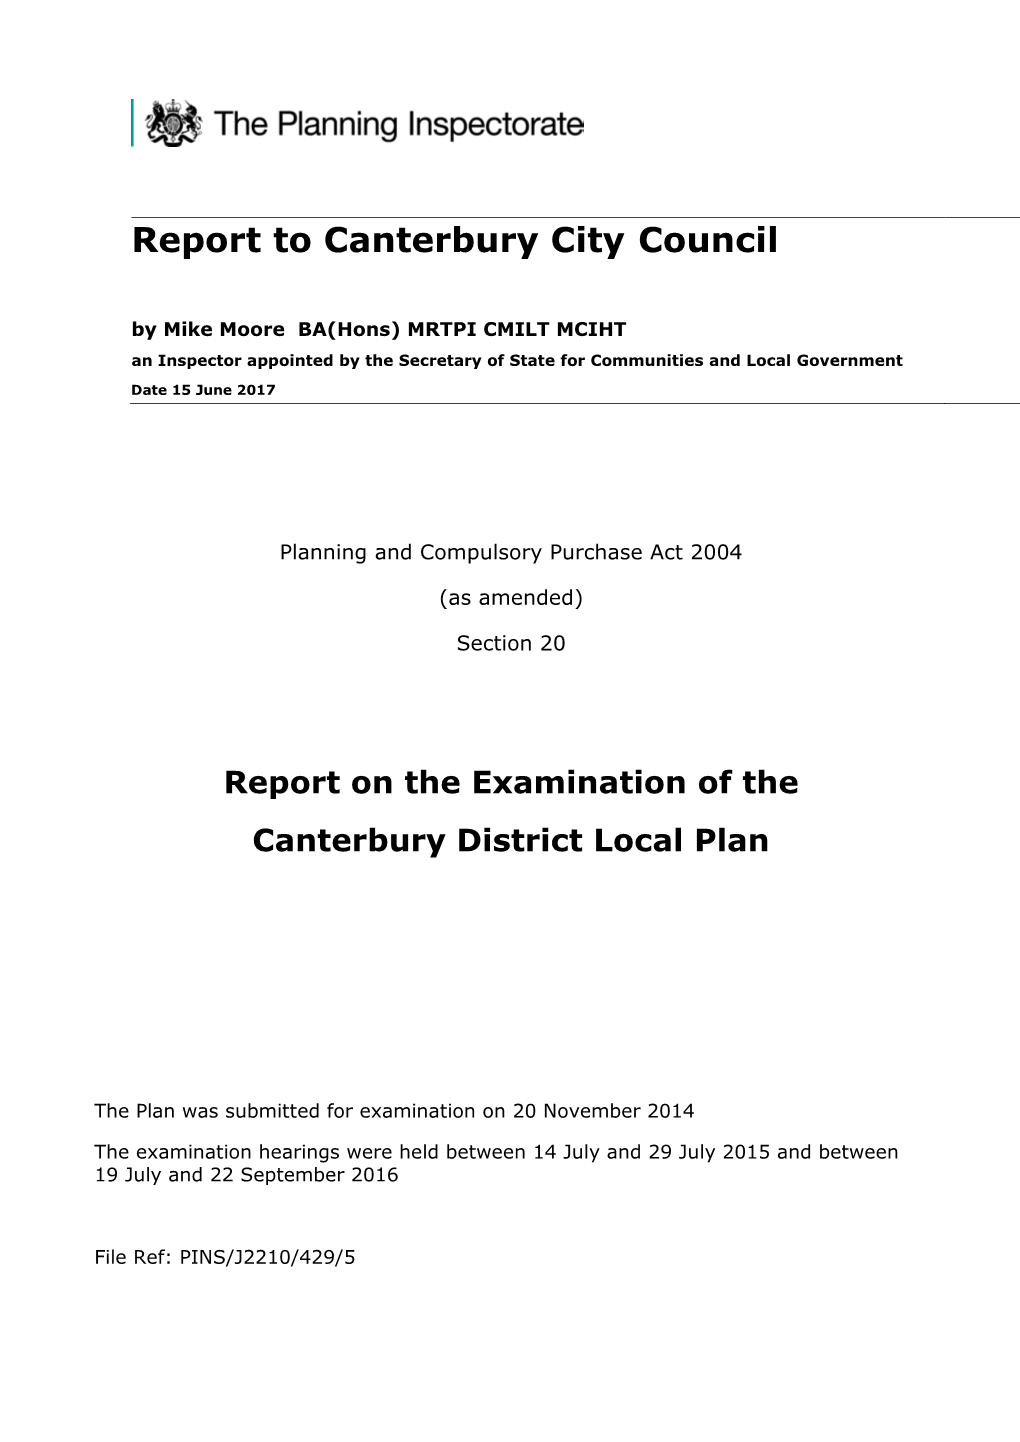 Report on the Examination of the Canterbury District Local Plan